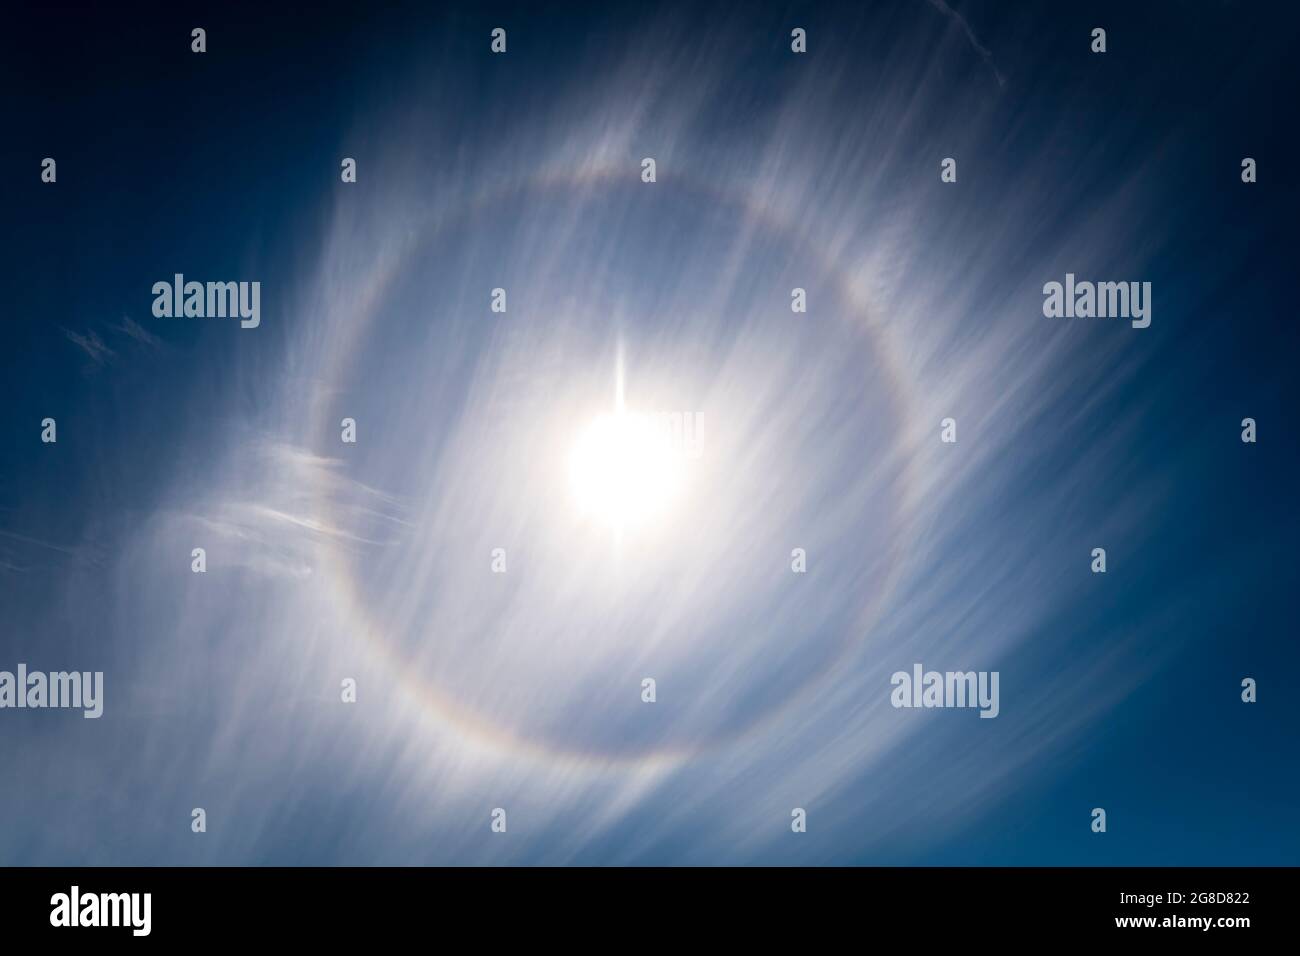 A 3 shot HDR image of a Sun Halo or 22 Degree Halo, an Atmospheric phenomena caused by ice crystals refracting light in Cirrus clouds, Scotland. Stock Photo